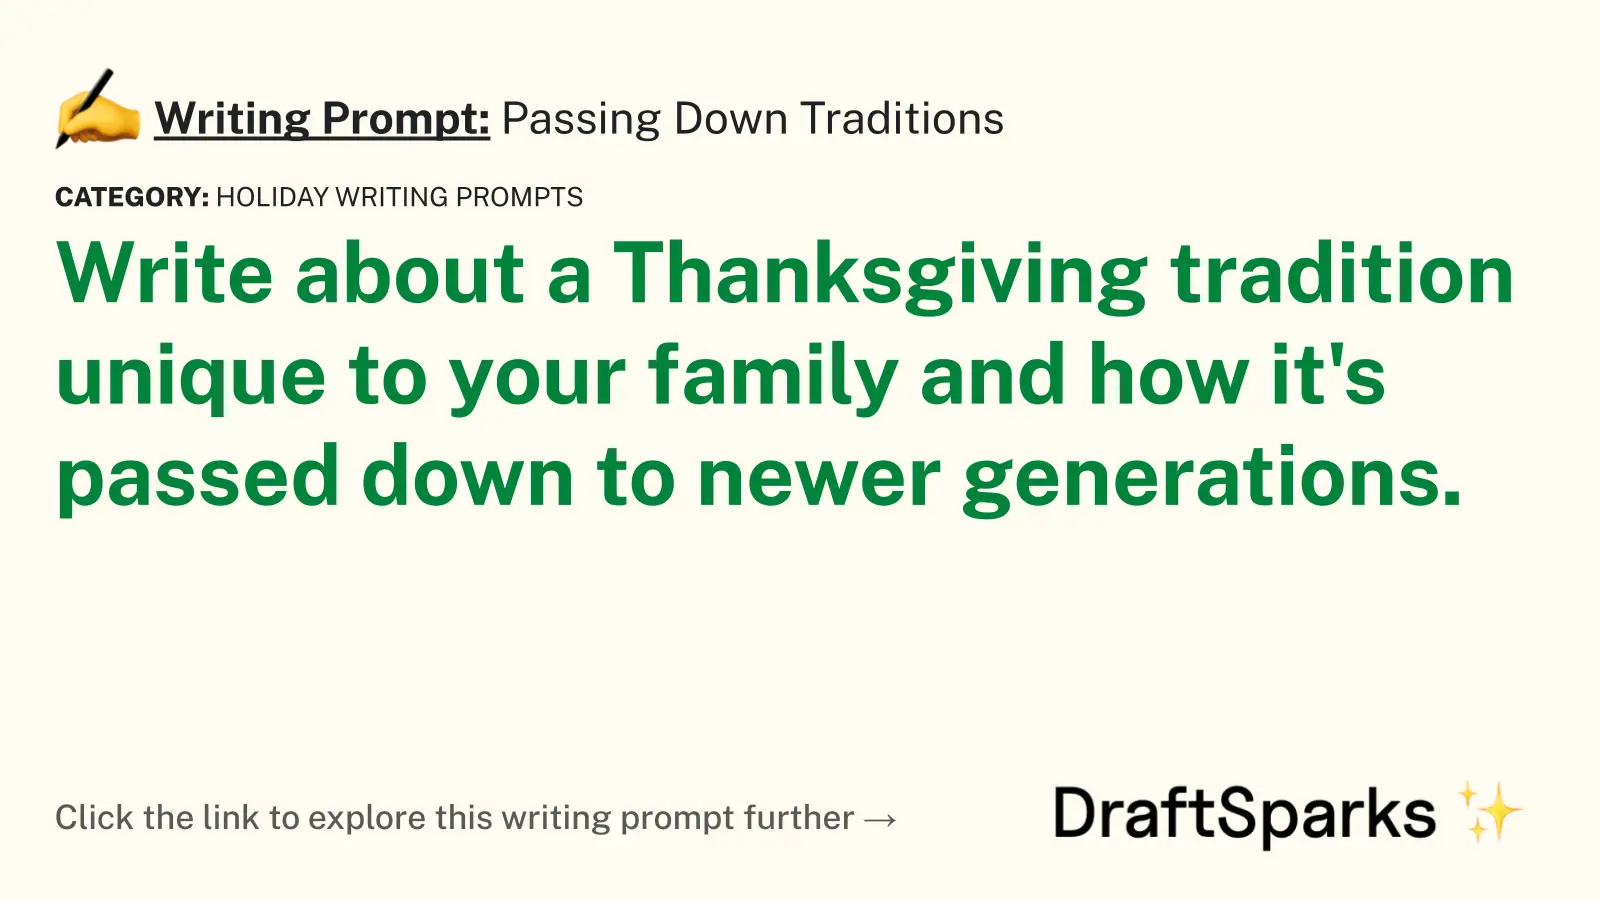 Passing Down Traditions